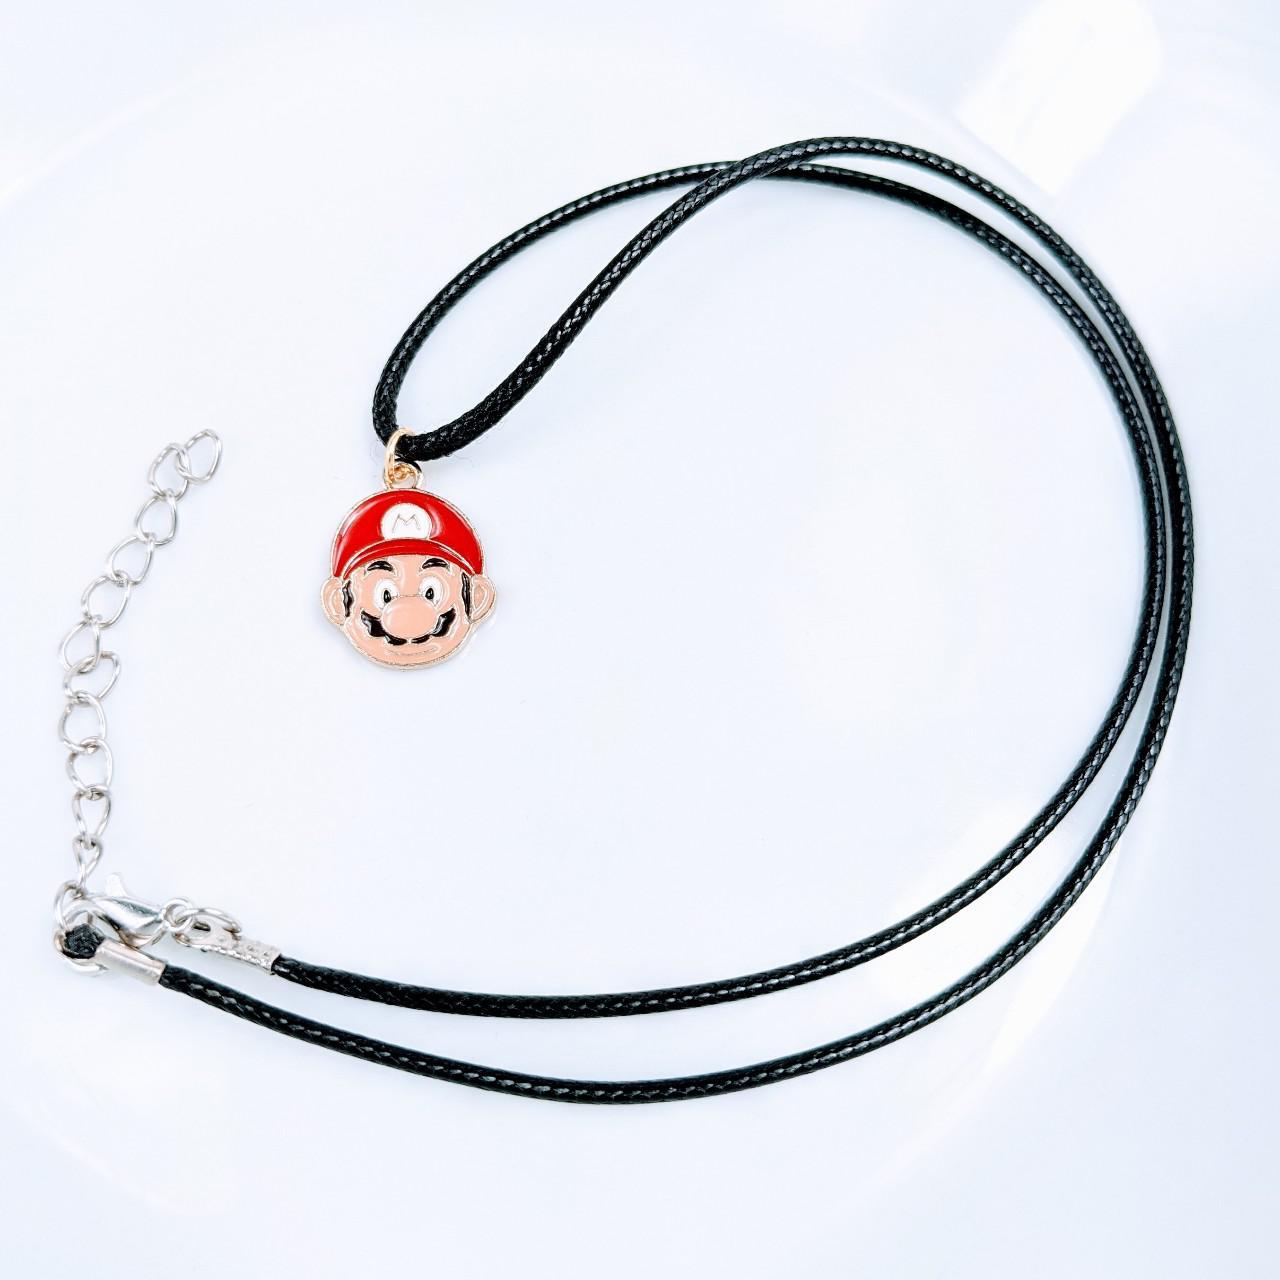 Product Image 2 - Mario Brothers Necklace
Brand new. 

Black